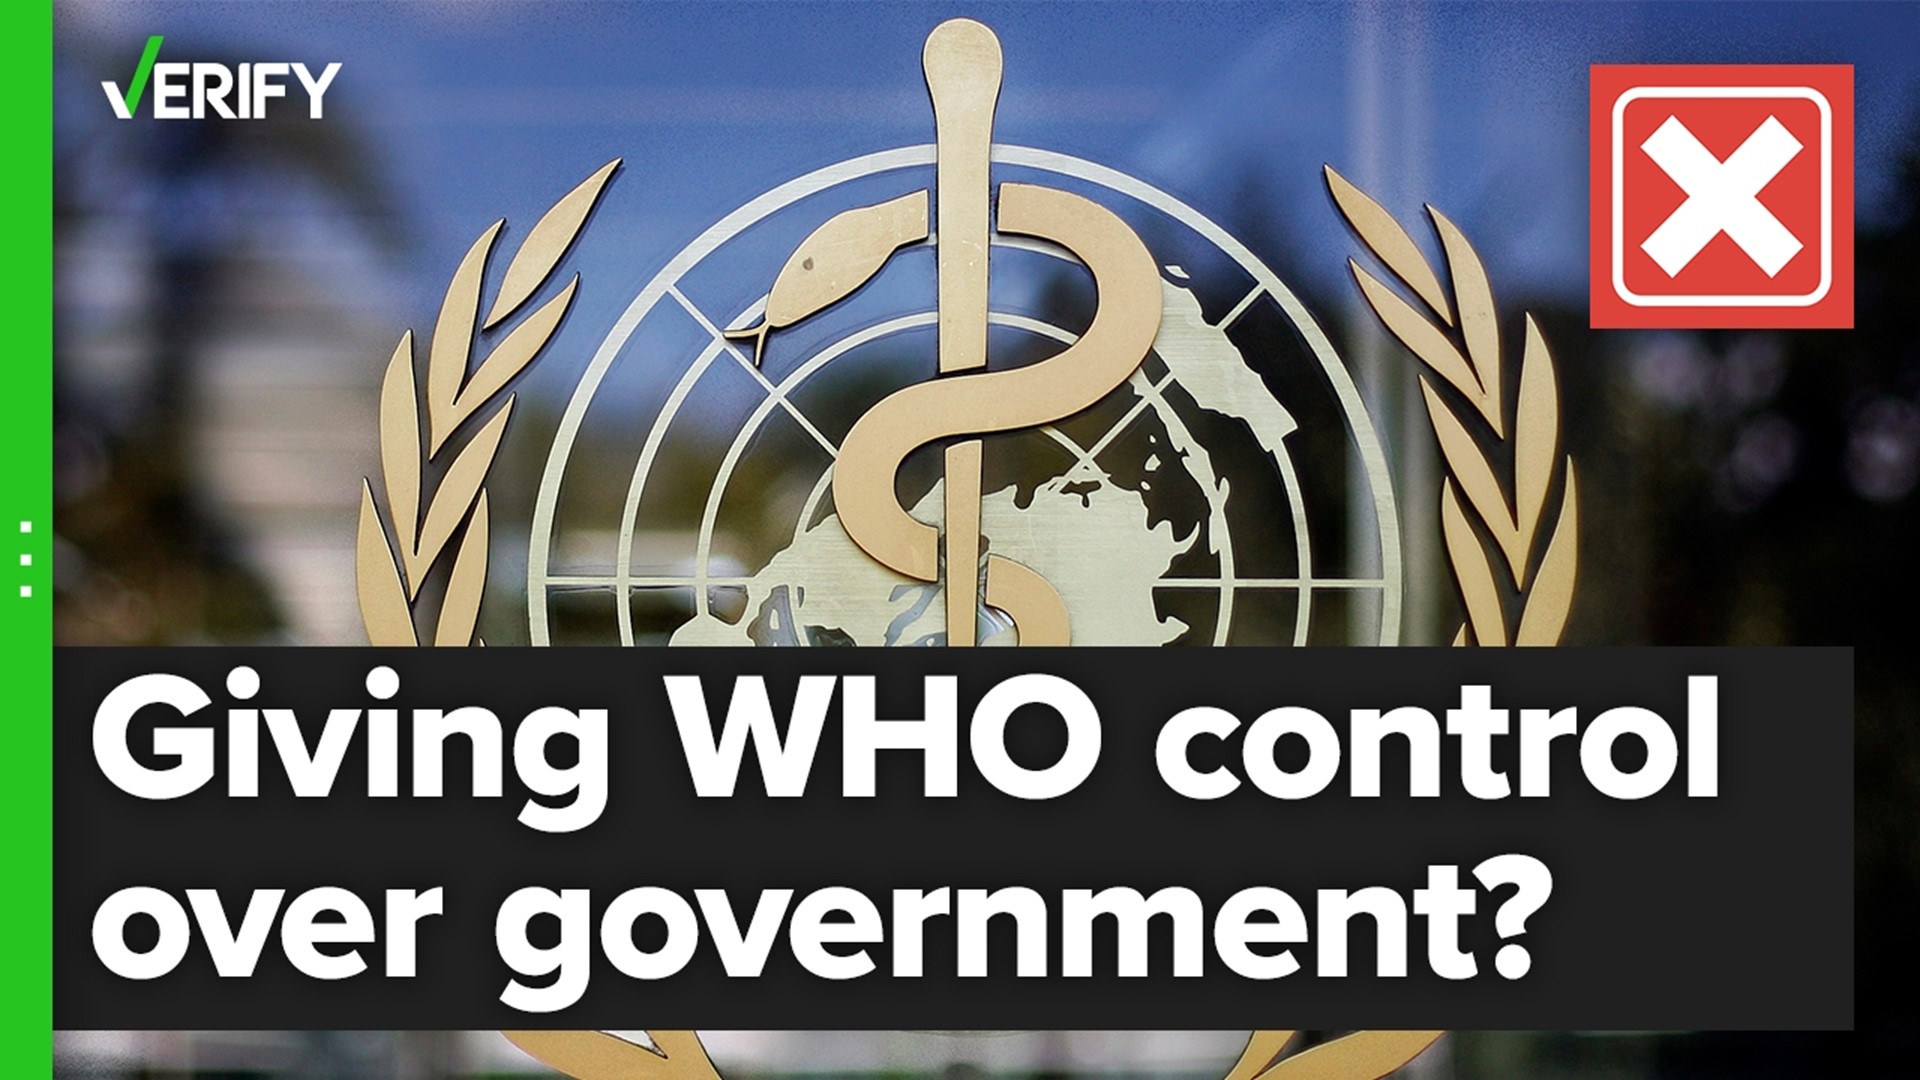 Proposed amendments to international health regulations covered by the World Health Organization does not grant the WHO any new powers over countries.